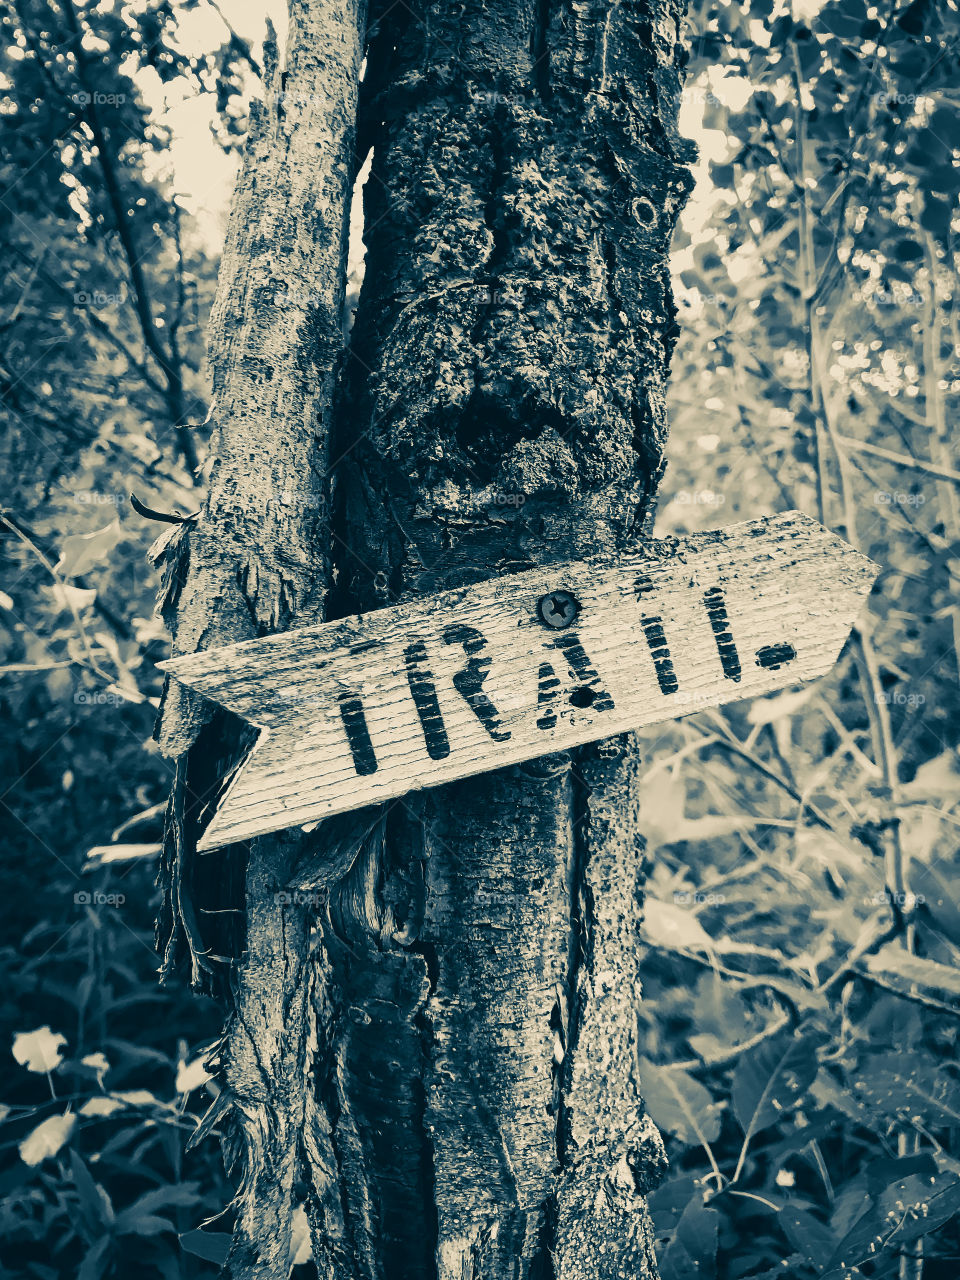 Black and White Version of Trail sign on the Archery Range along Mink Creek Recreational area in the Bannock Mountain Range 12 miles from Pocatello Idaho